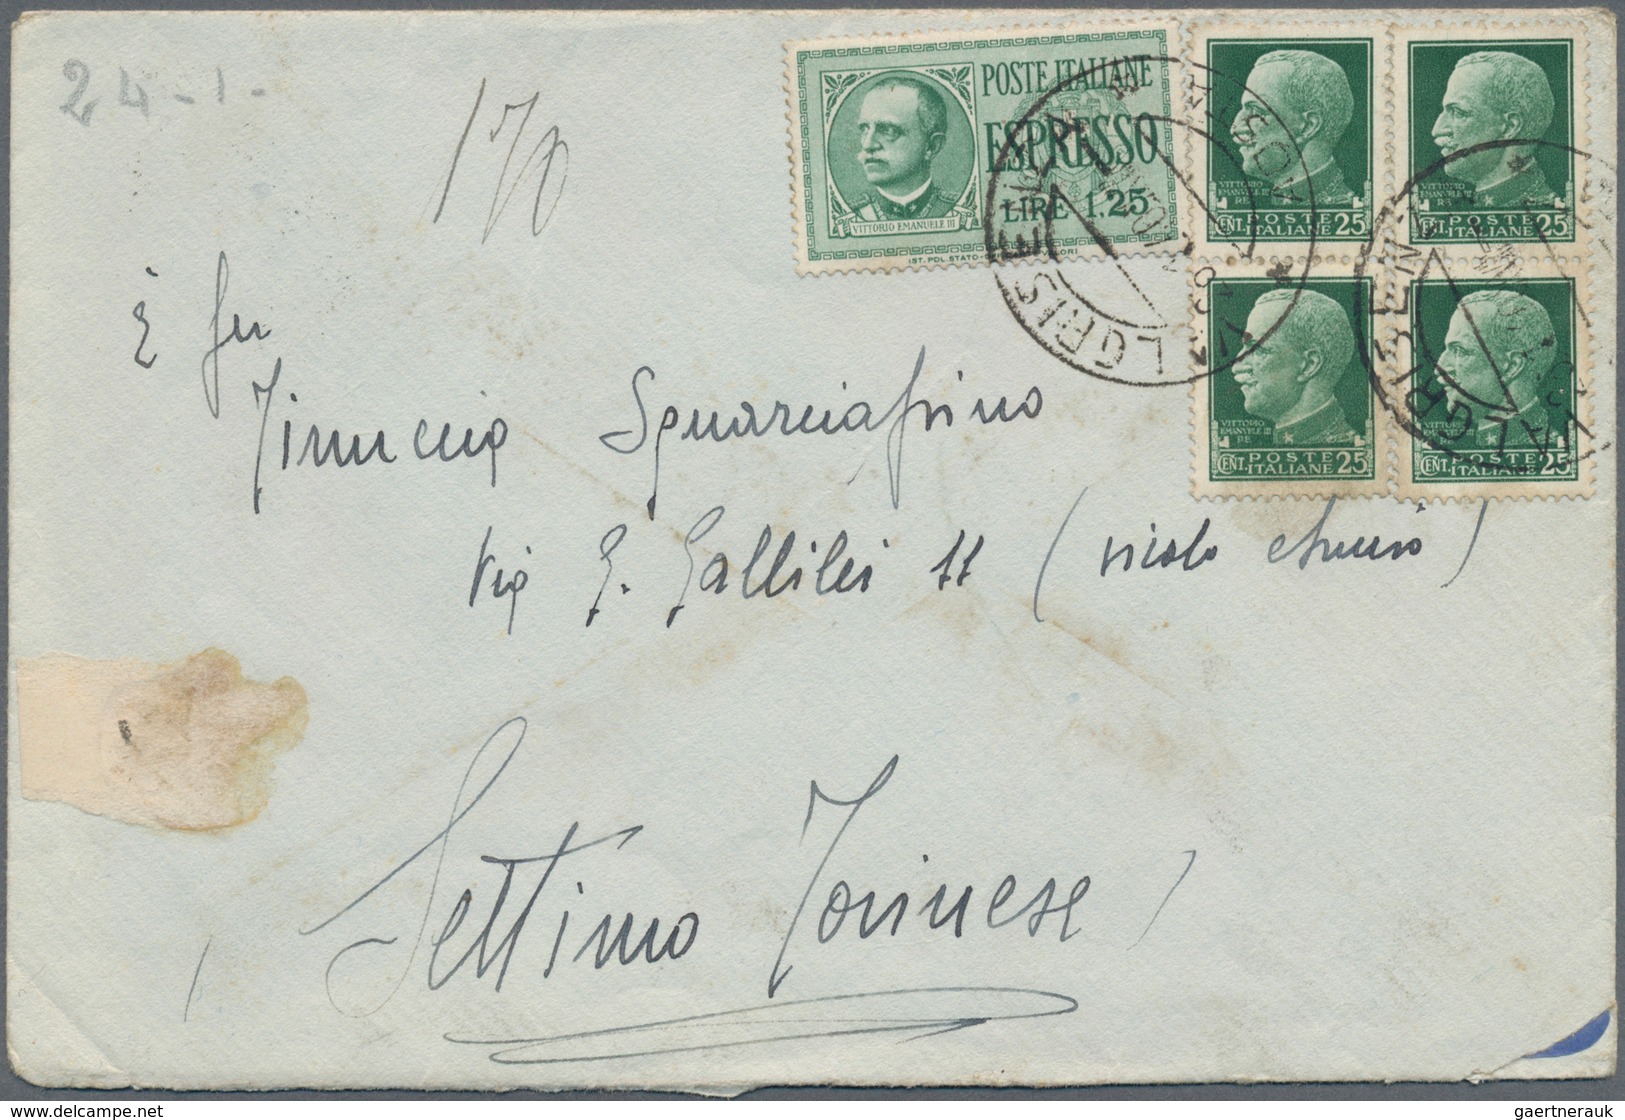 Italien - Besonderheiten: 1939/1940, lot of 57 covers used in the Aosta Valley (Valle d'Aosta) with